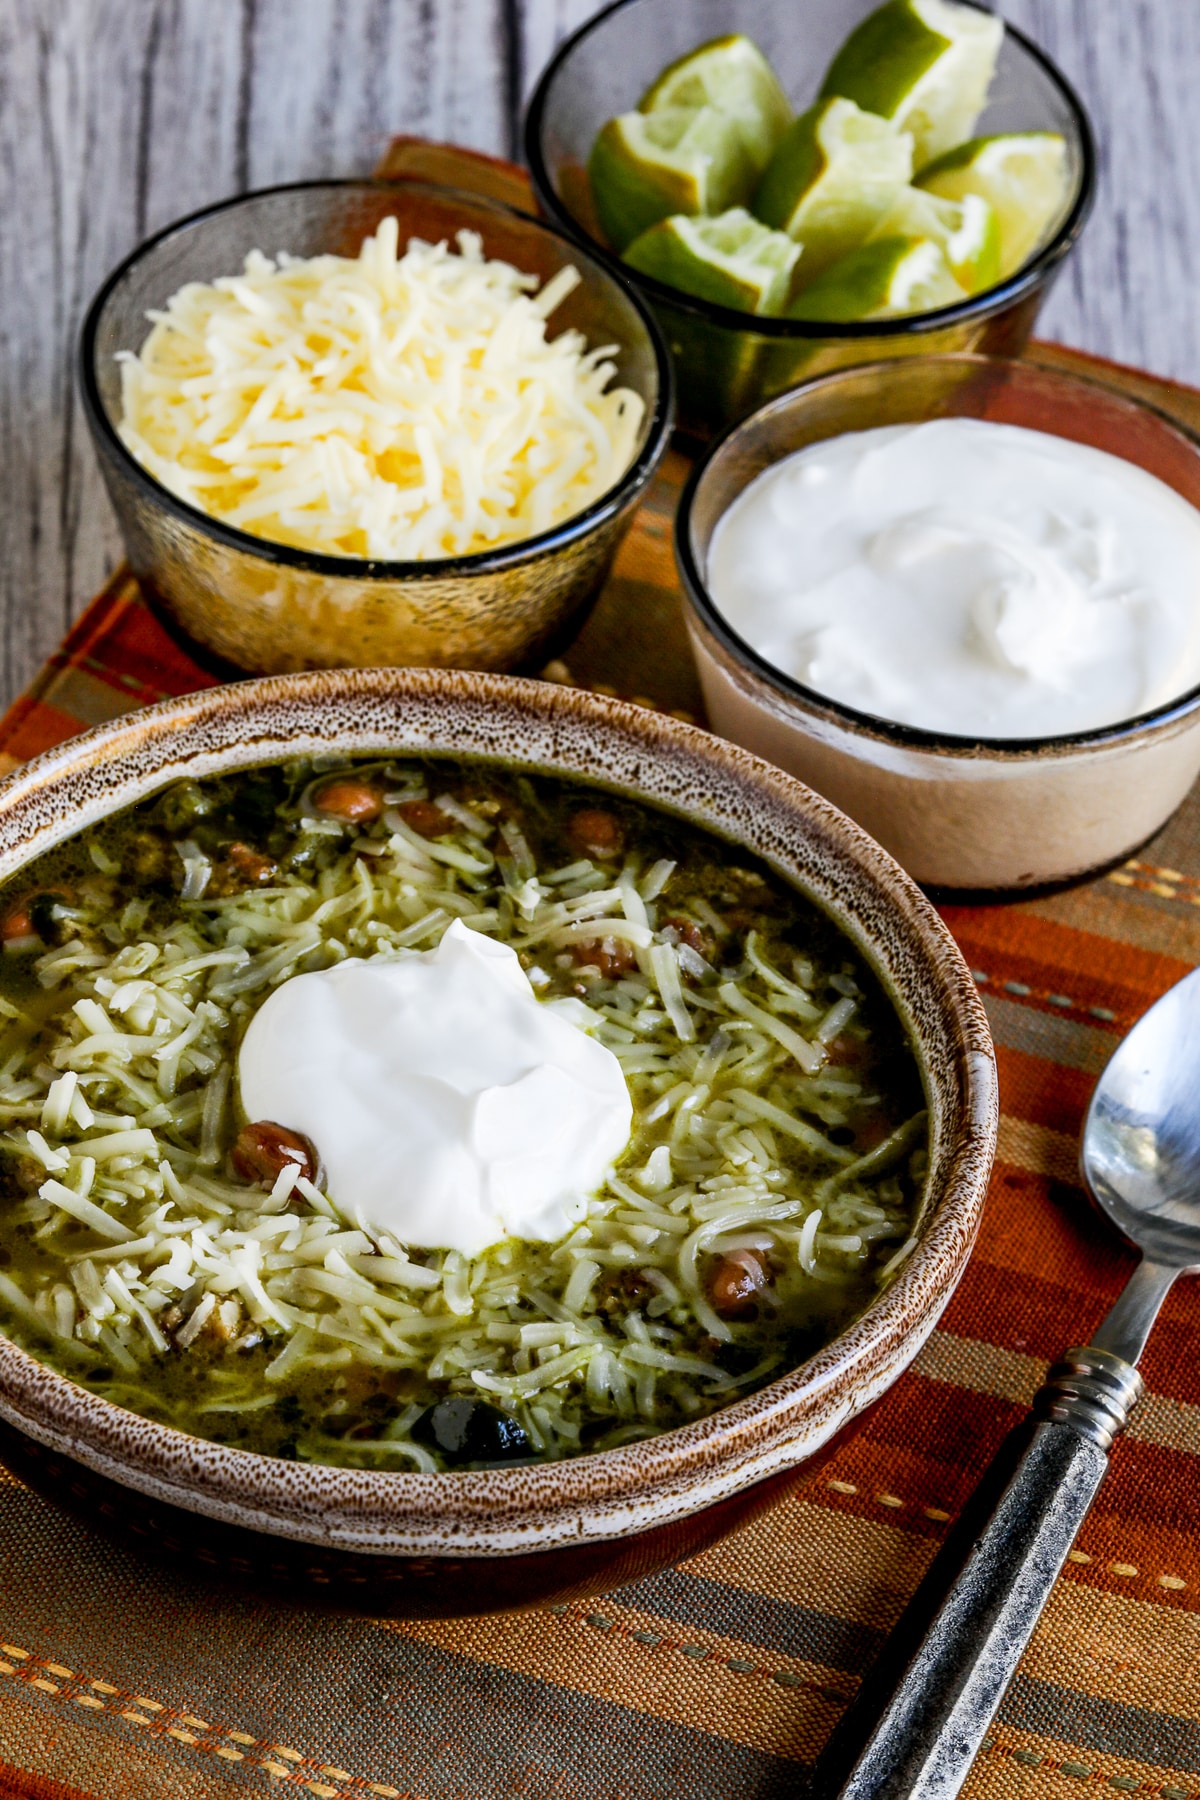 Turkey Pinto Bean Chili Lay Out In A Serving Bowl With Cheese And Sour Cream